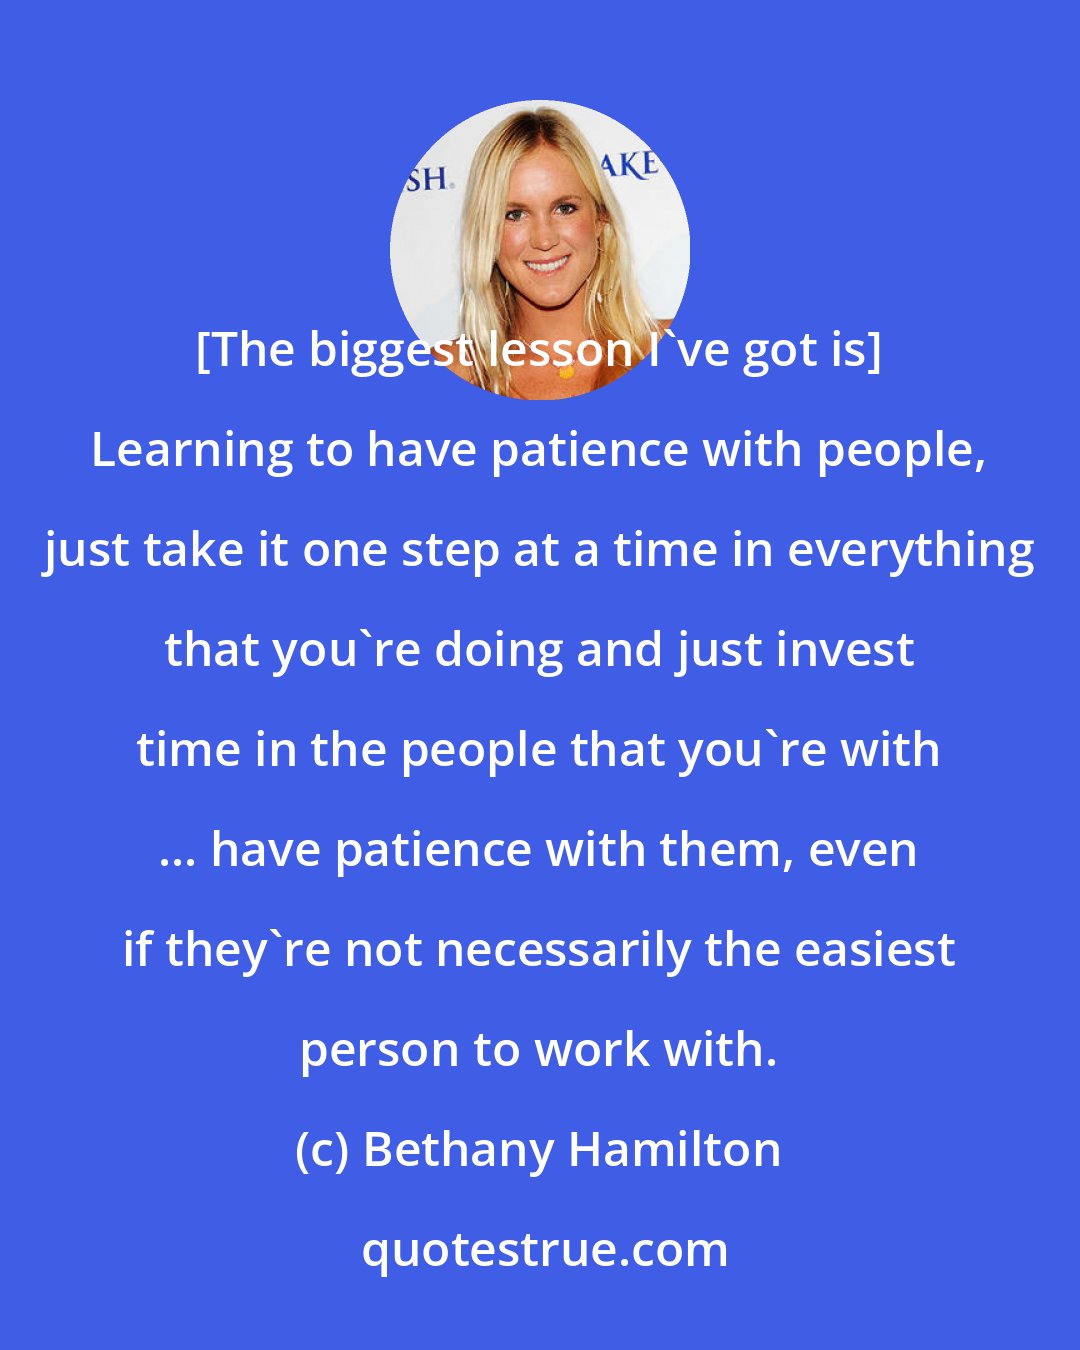 Bethany Hamilton: [The biggest lesson I've got is] Learning to have patience with people, just take it one step at a time in everything that you're doing and just invest time in the people that you're with ... have patience with them, even if they're not necessarily the easiest person to work with.